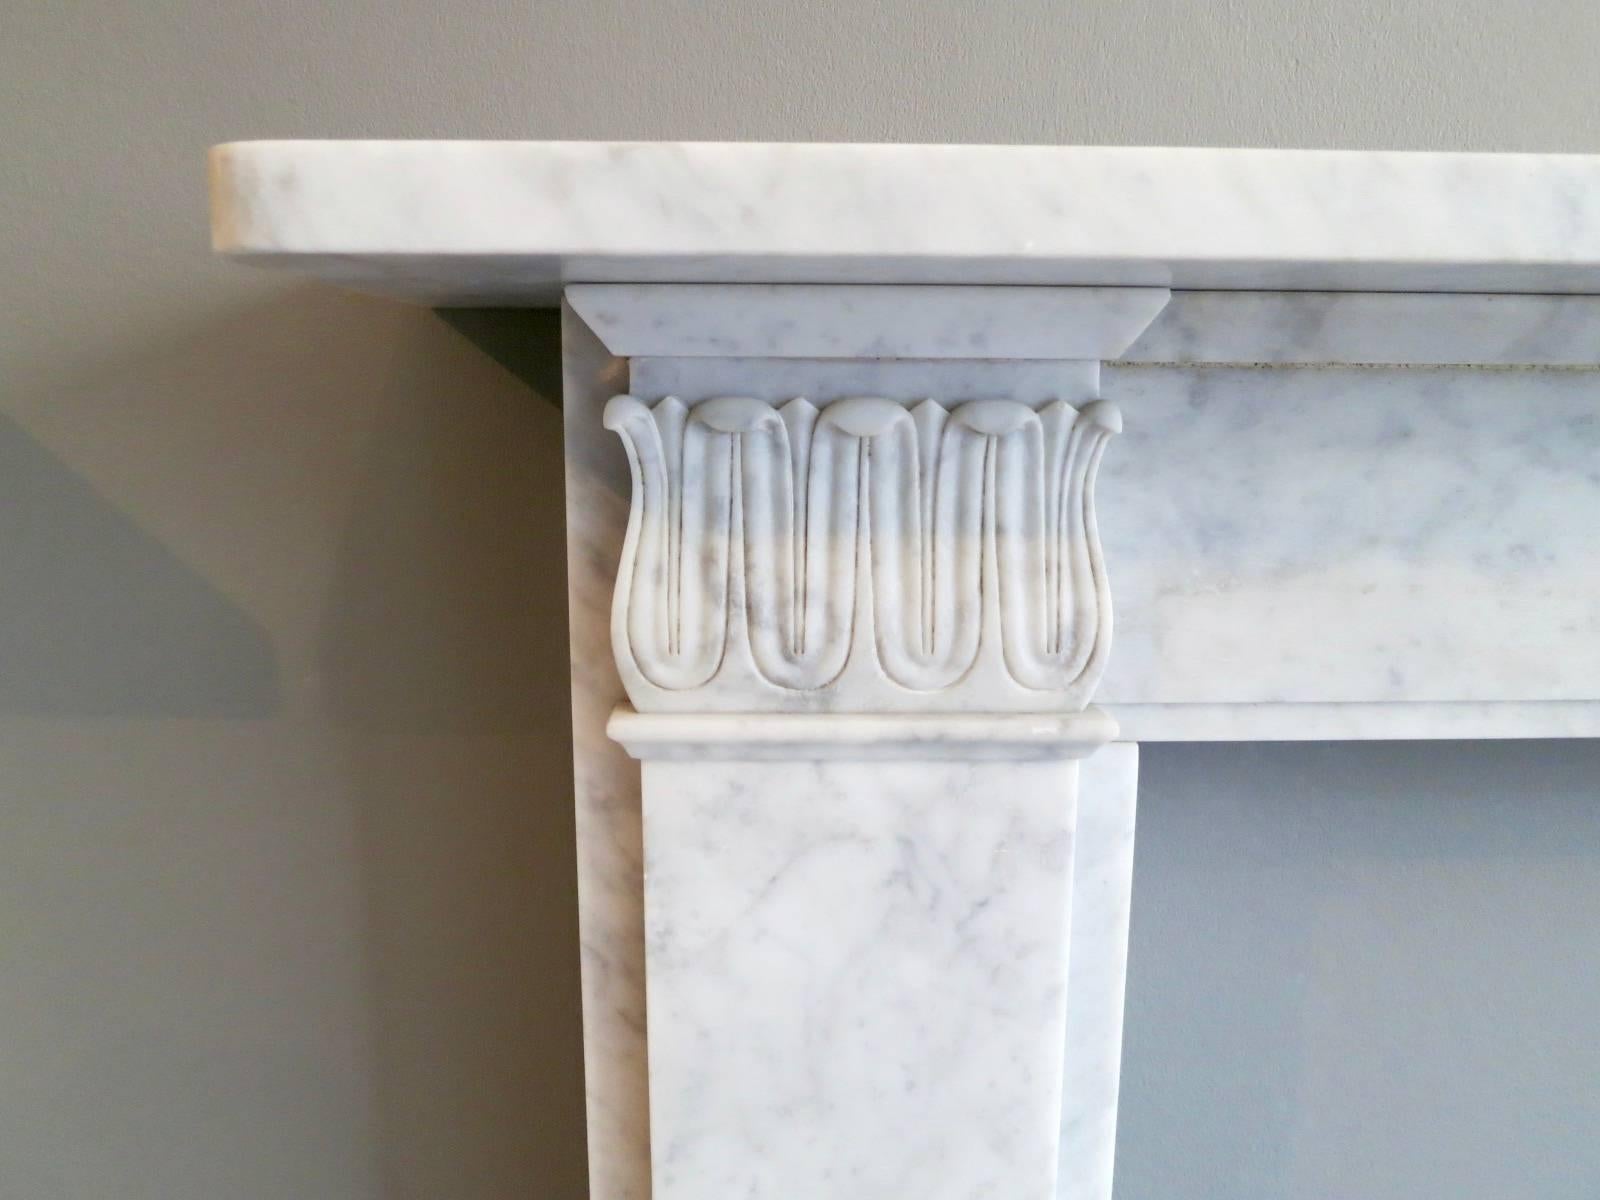 A slightly aged Regency style fireplace in Carrara marble. A good quality reproduction piece, available in custom sizes and other marbles.

Opening size 91.5cm x 91.5cm 